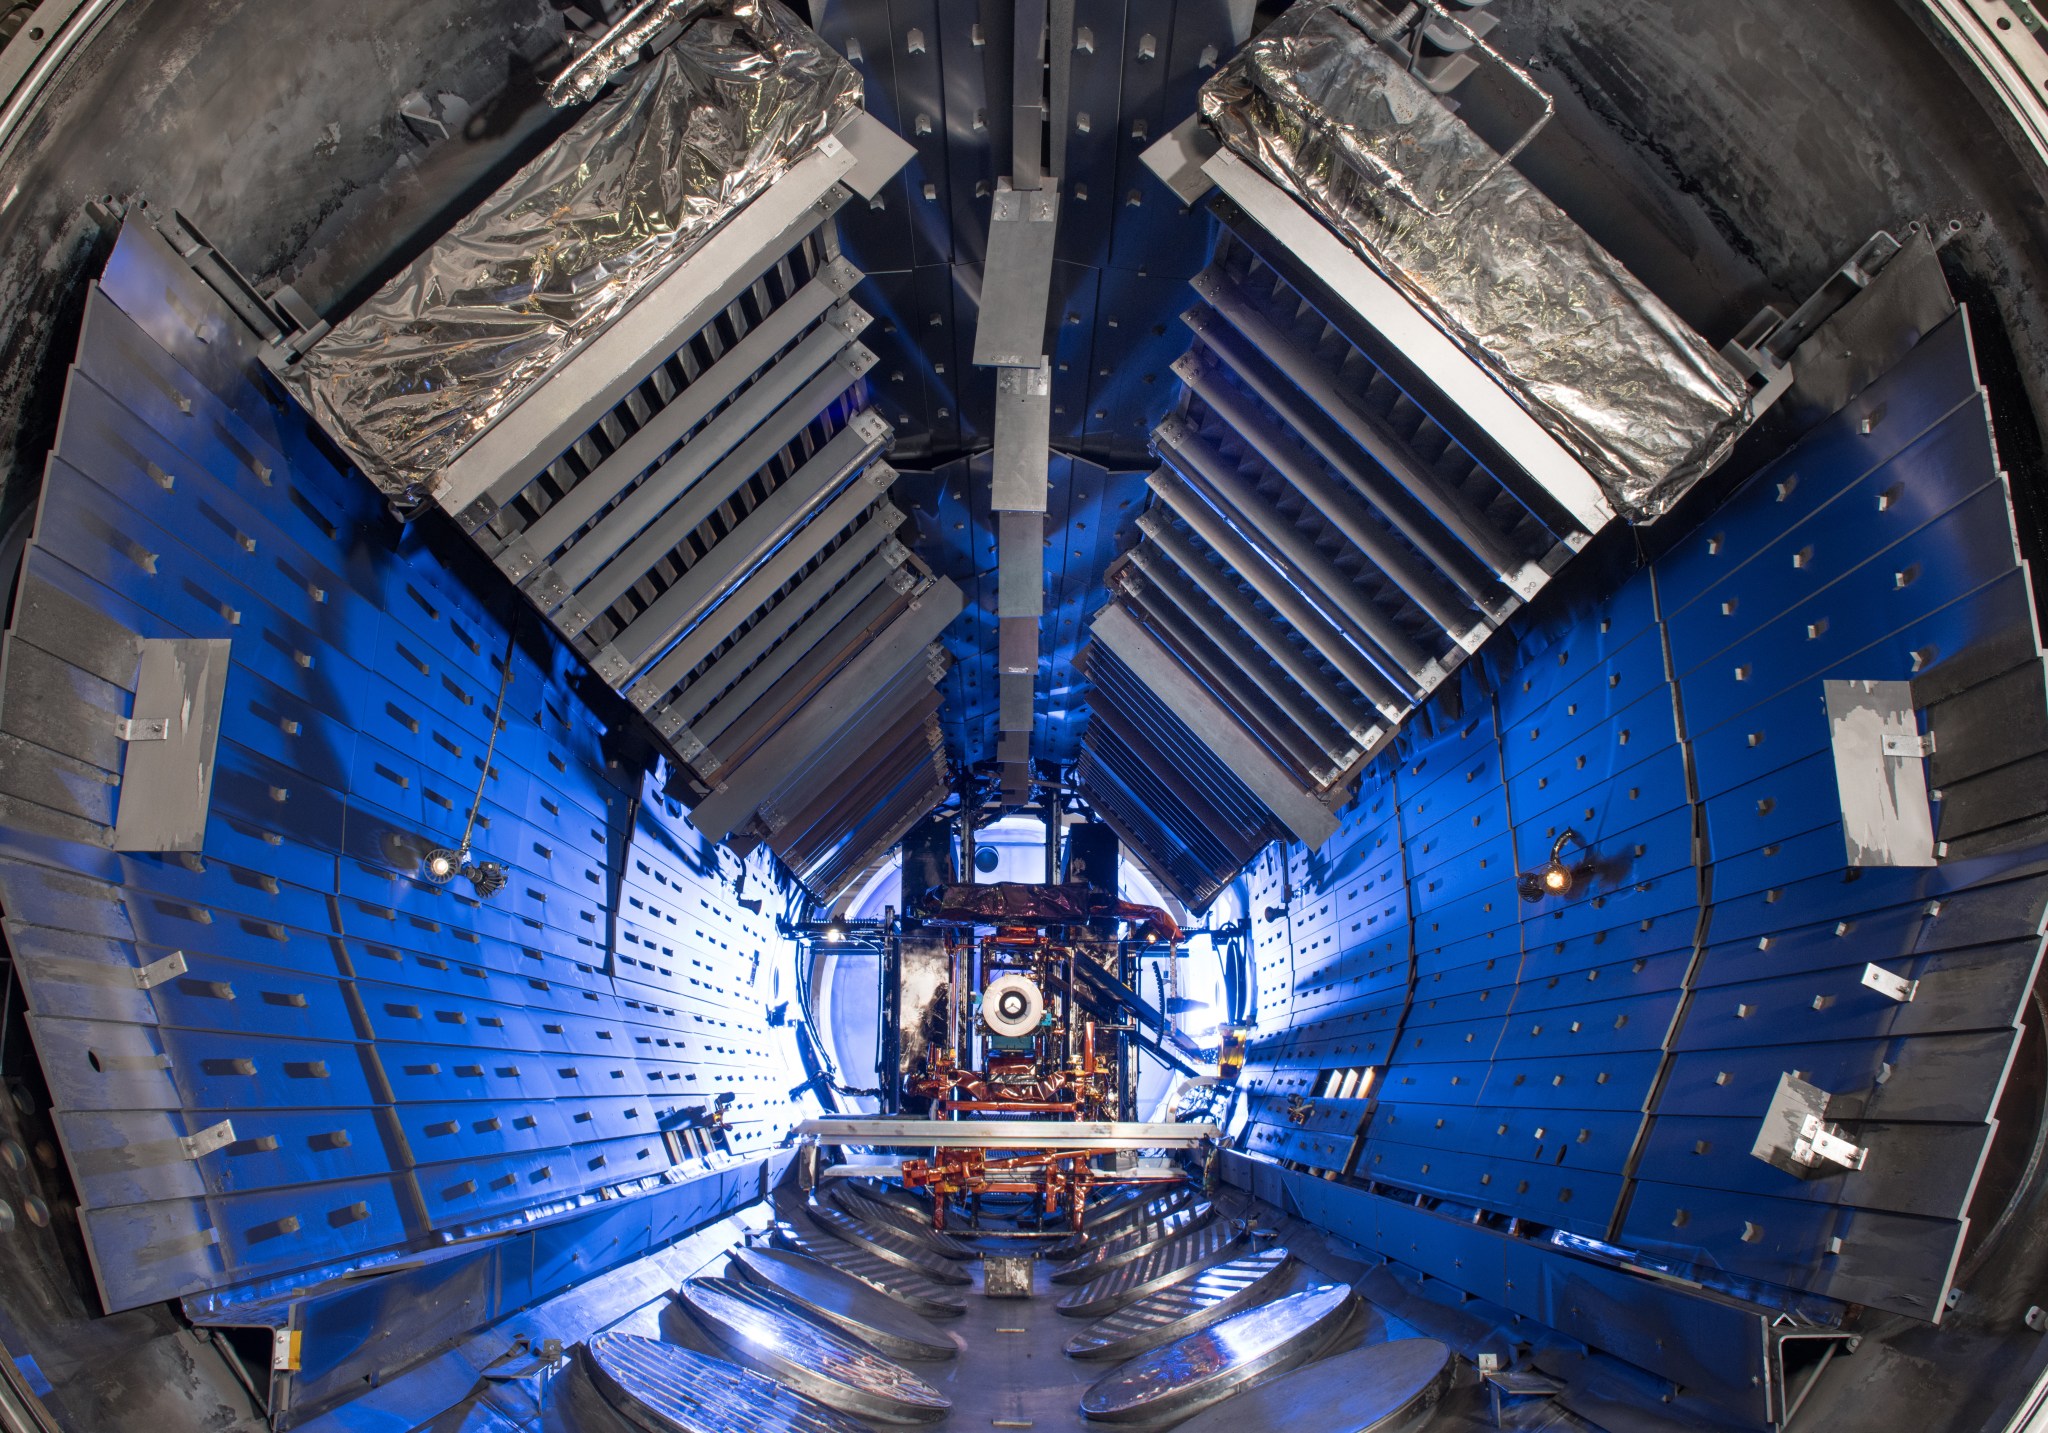 A view inside a space vacuum chamber. The interior of the chamber resembles a large metal cylinder with silver, rectangular, panels lining the walls and ceiling. The interior of the chamber is illuminated by blue lights. Test hardware is mounted in the center of the chamber on a structure that resembles scaffolding. 